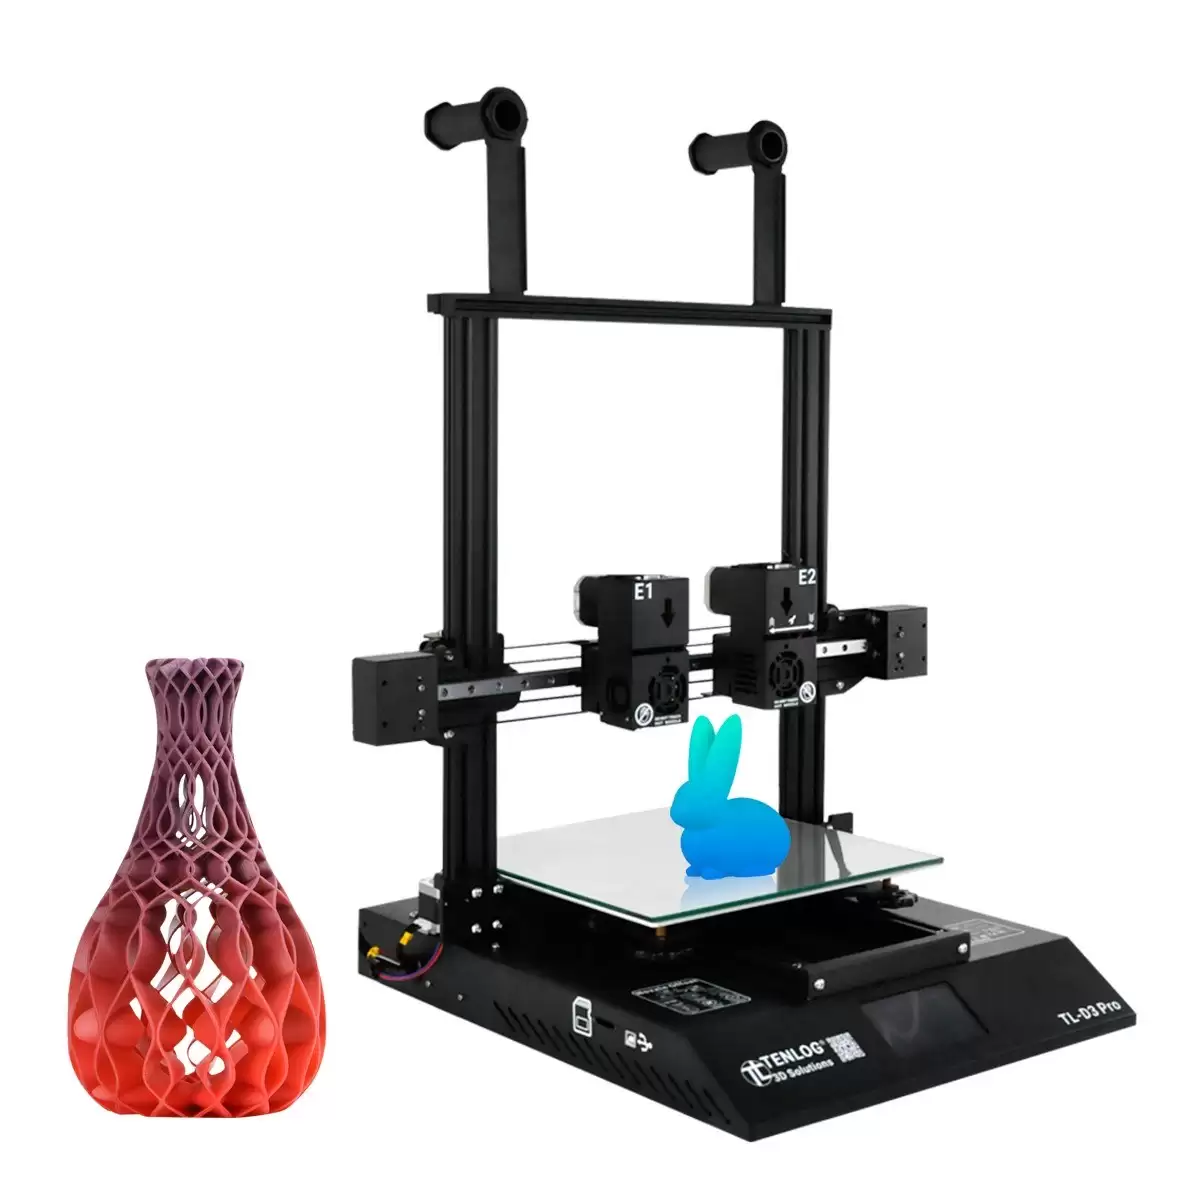 Get Extra $163.35 Off On Tenlog Tl-D3 Pro 3d Printer, Limited Offers With This Discount Coupon At Tomtop